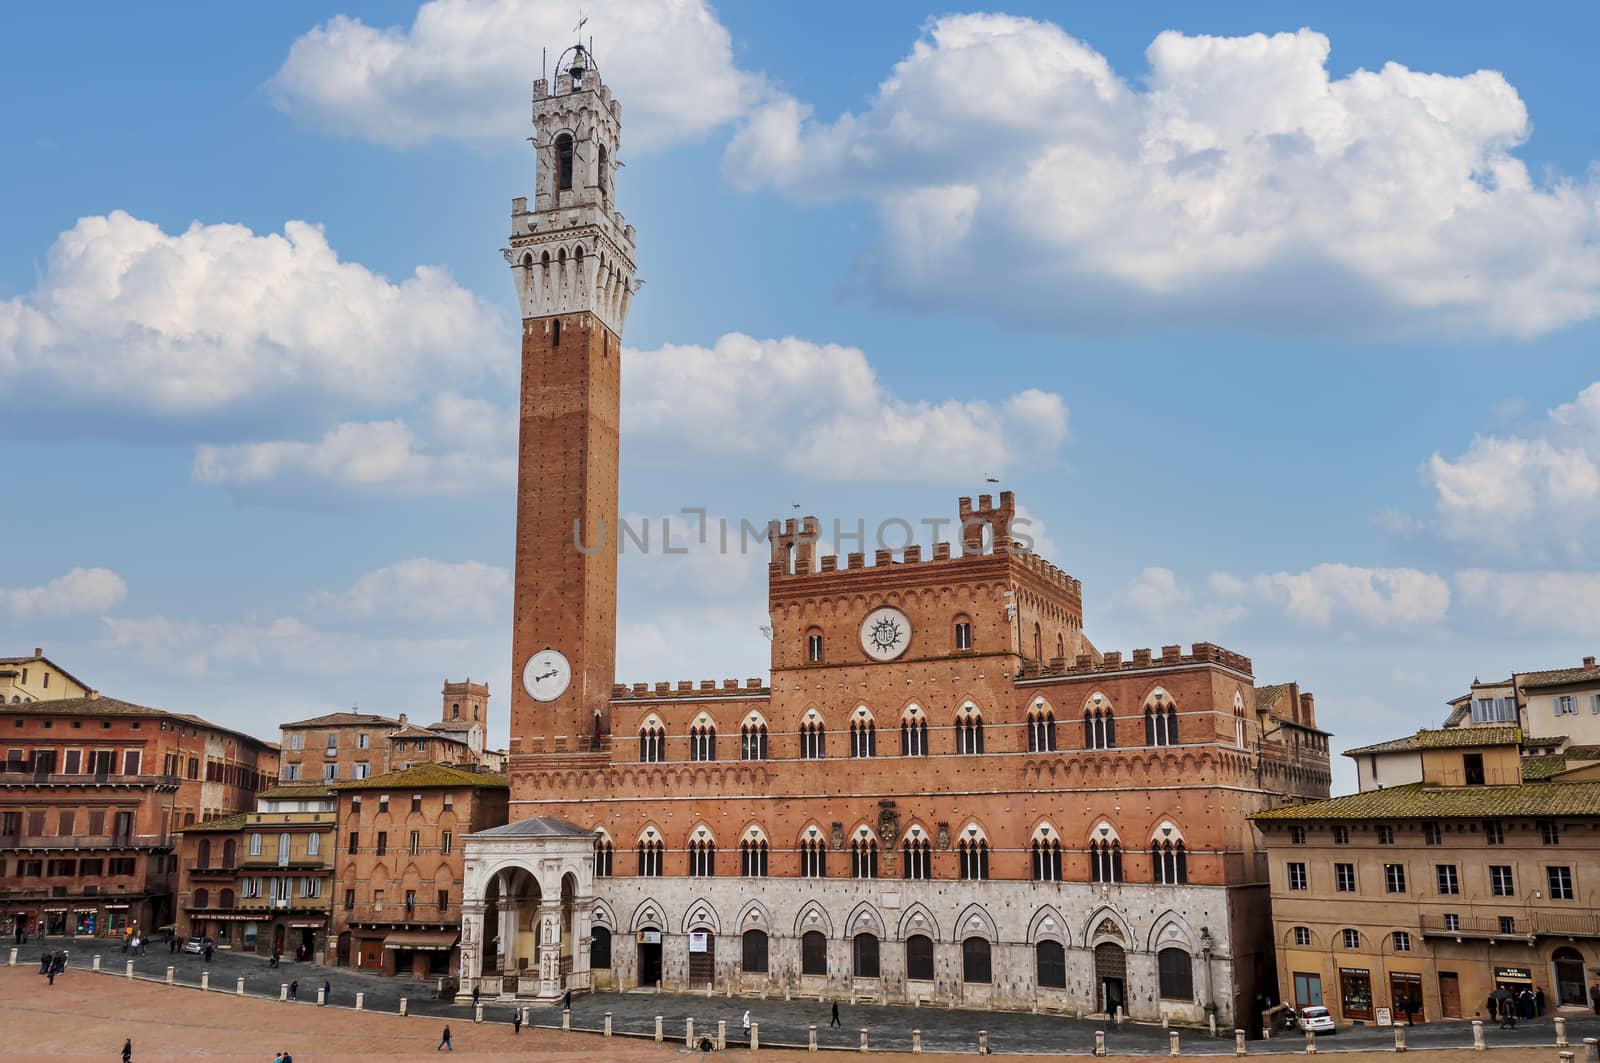 Palazzo Pubblico and Torre del Mangia piazza del campo in Siena in Tuscany, Italy by Frederic